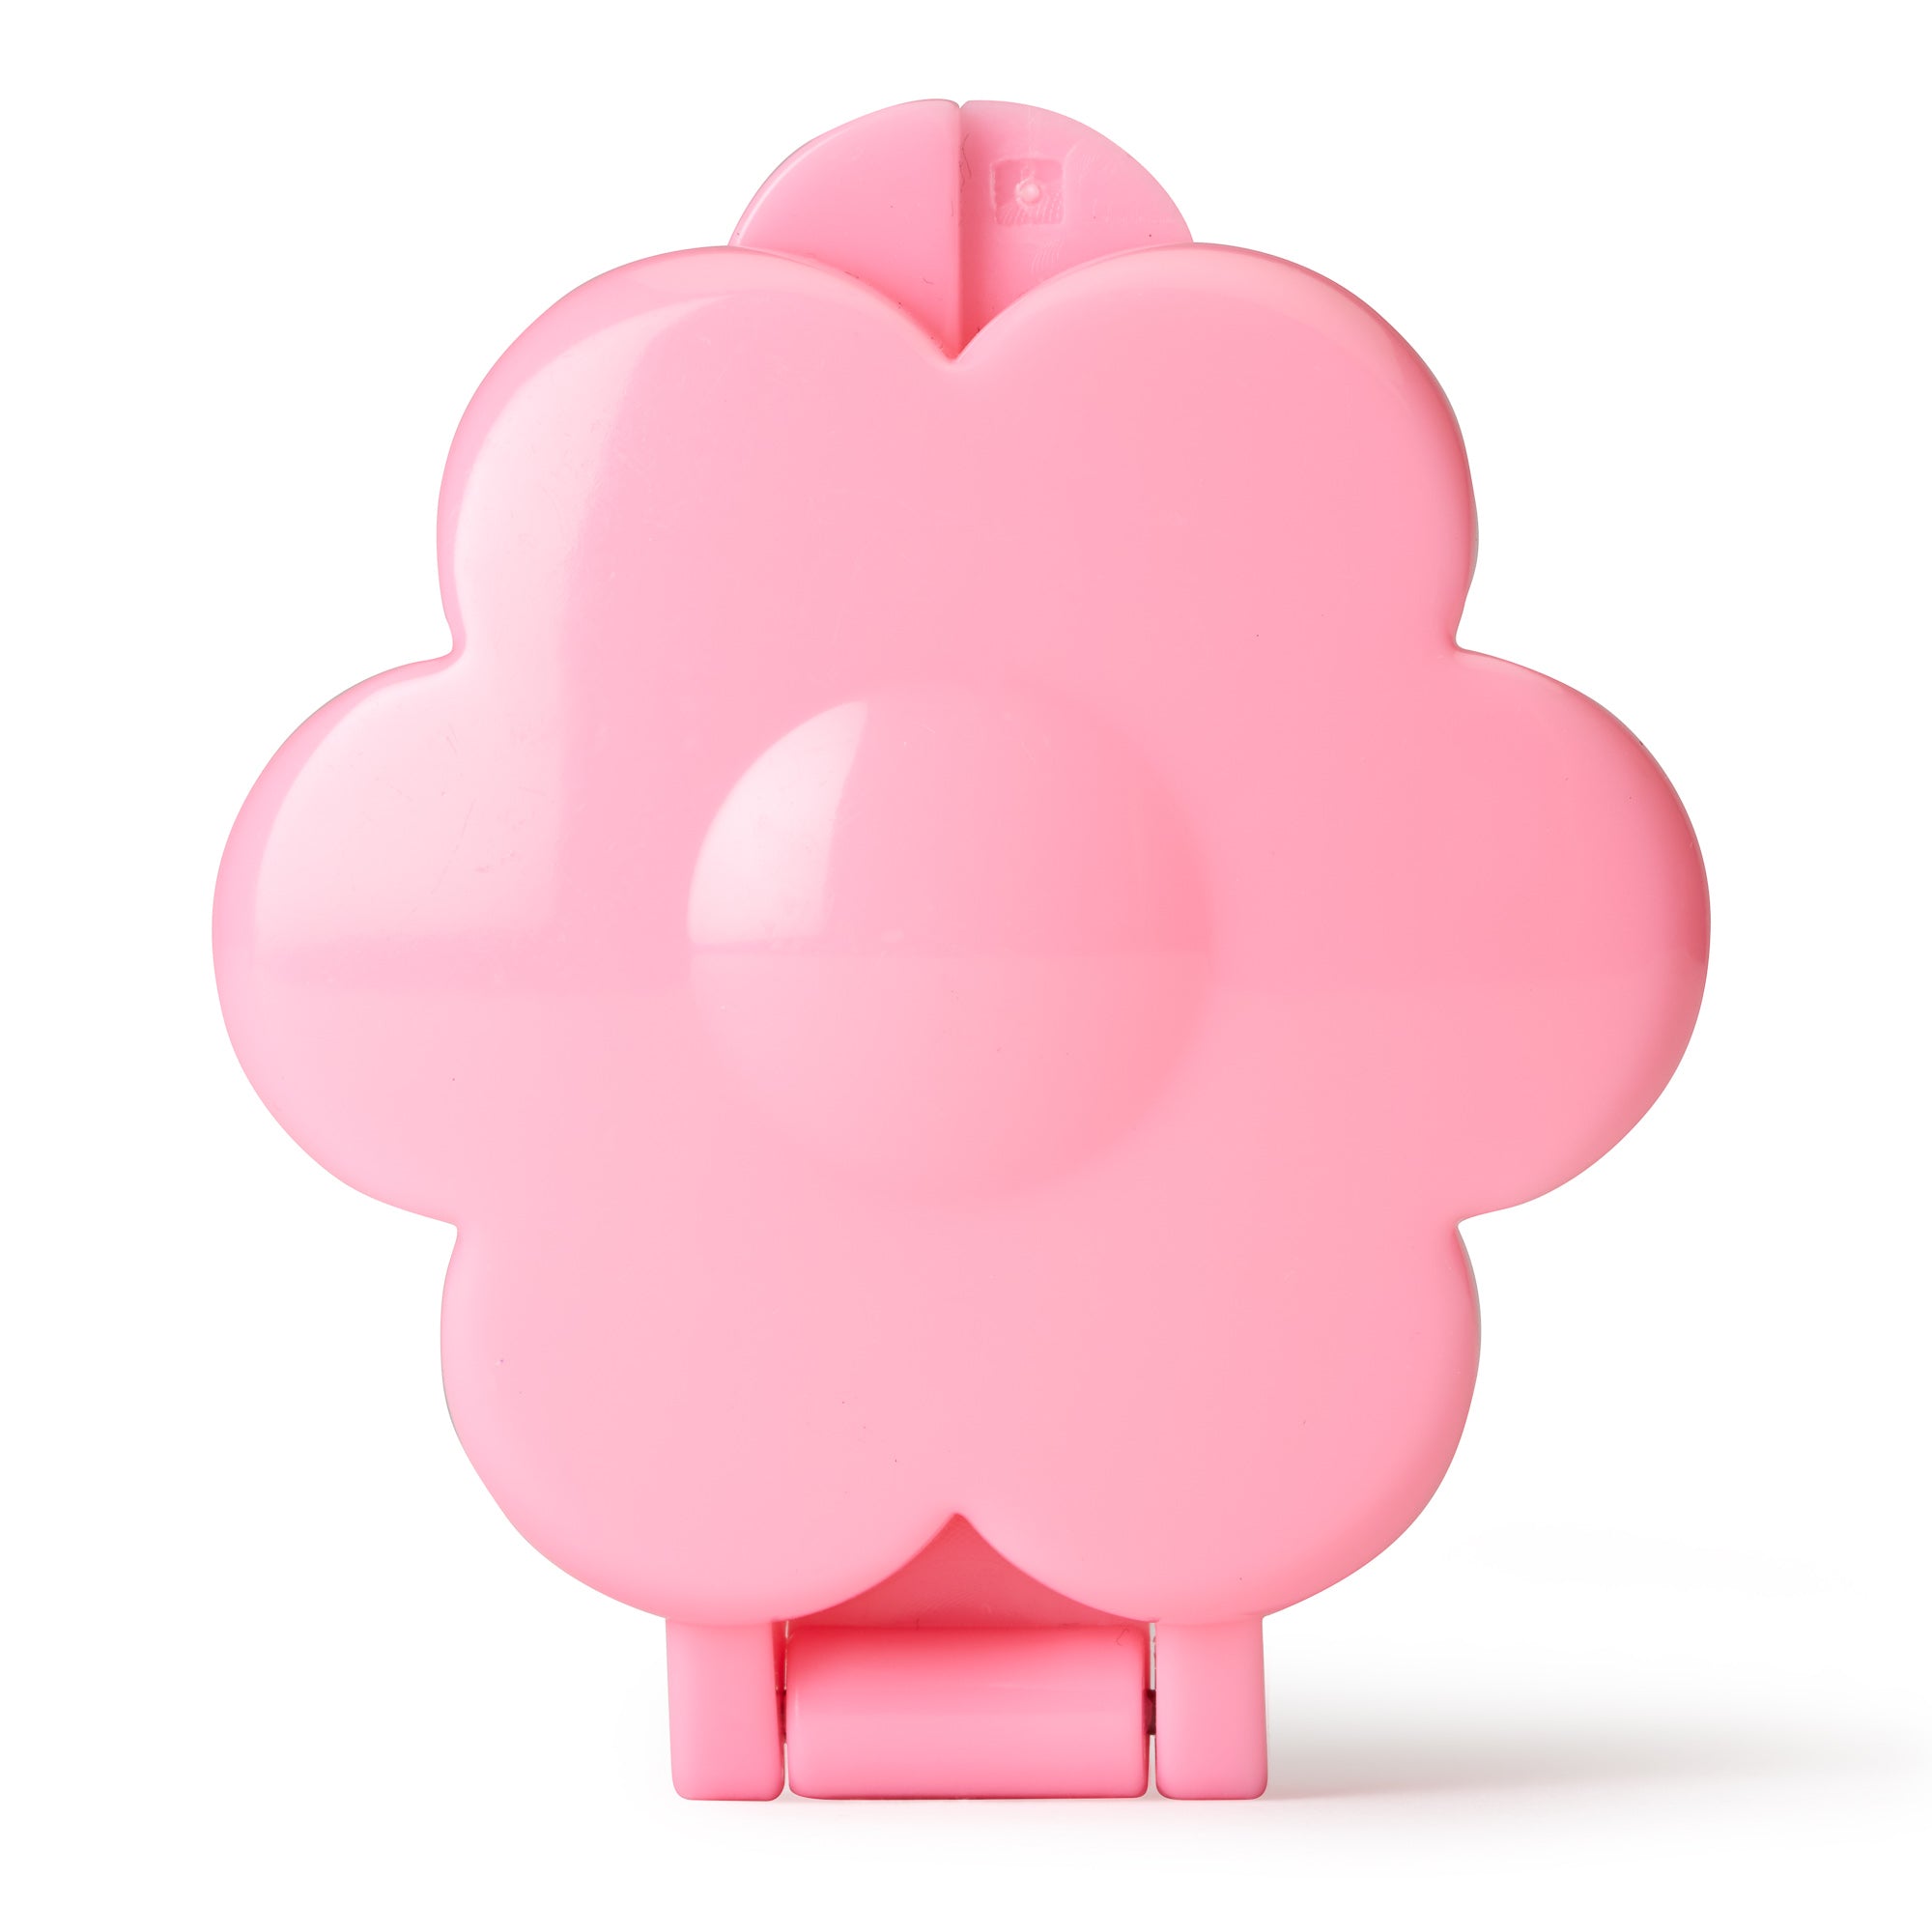 Cake pop mold, mini cake board and & flower mold from @mylittlecakepop